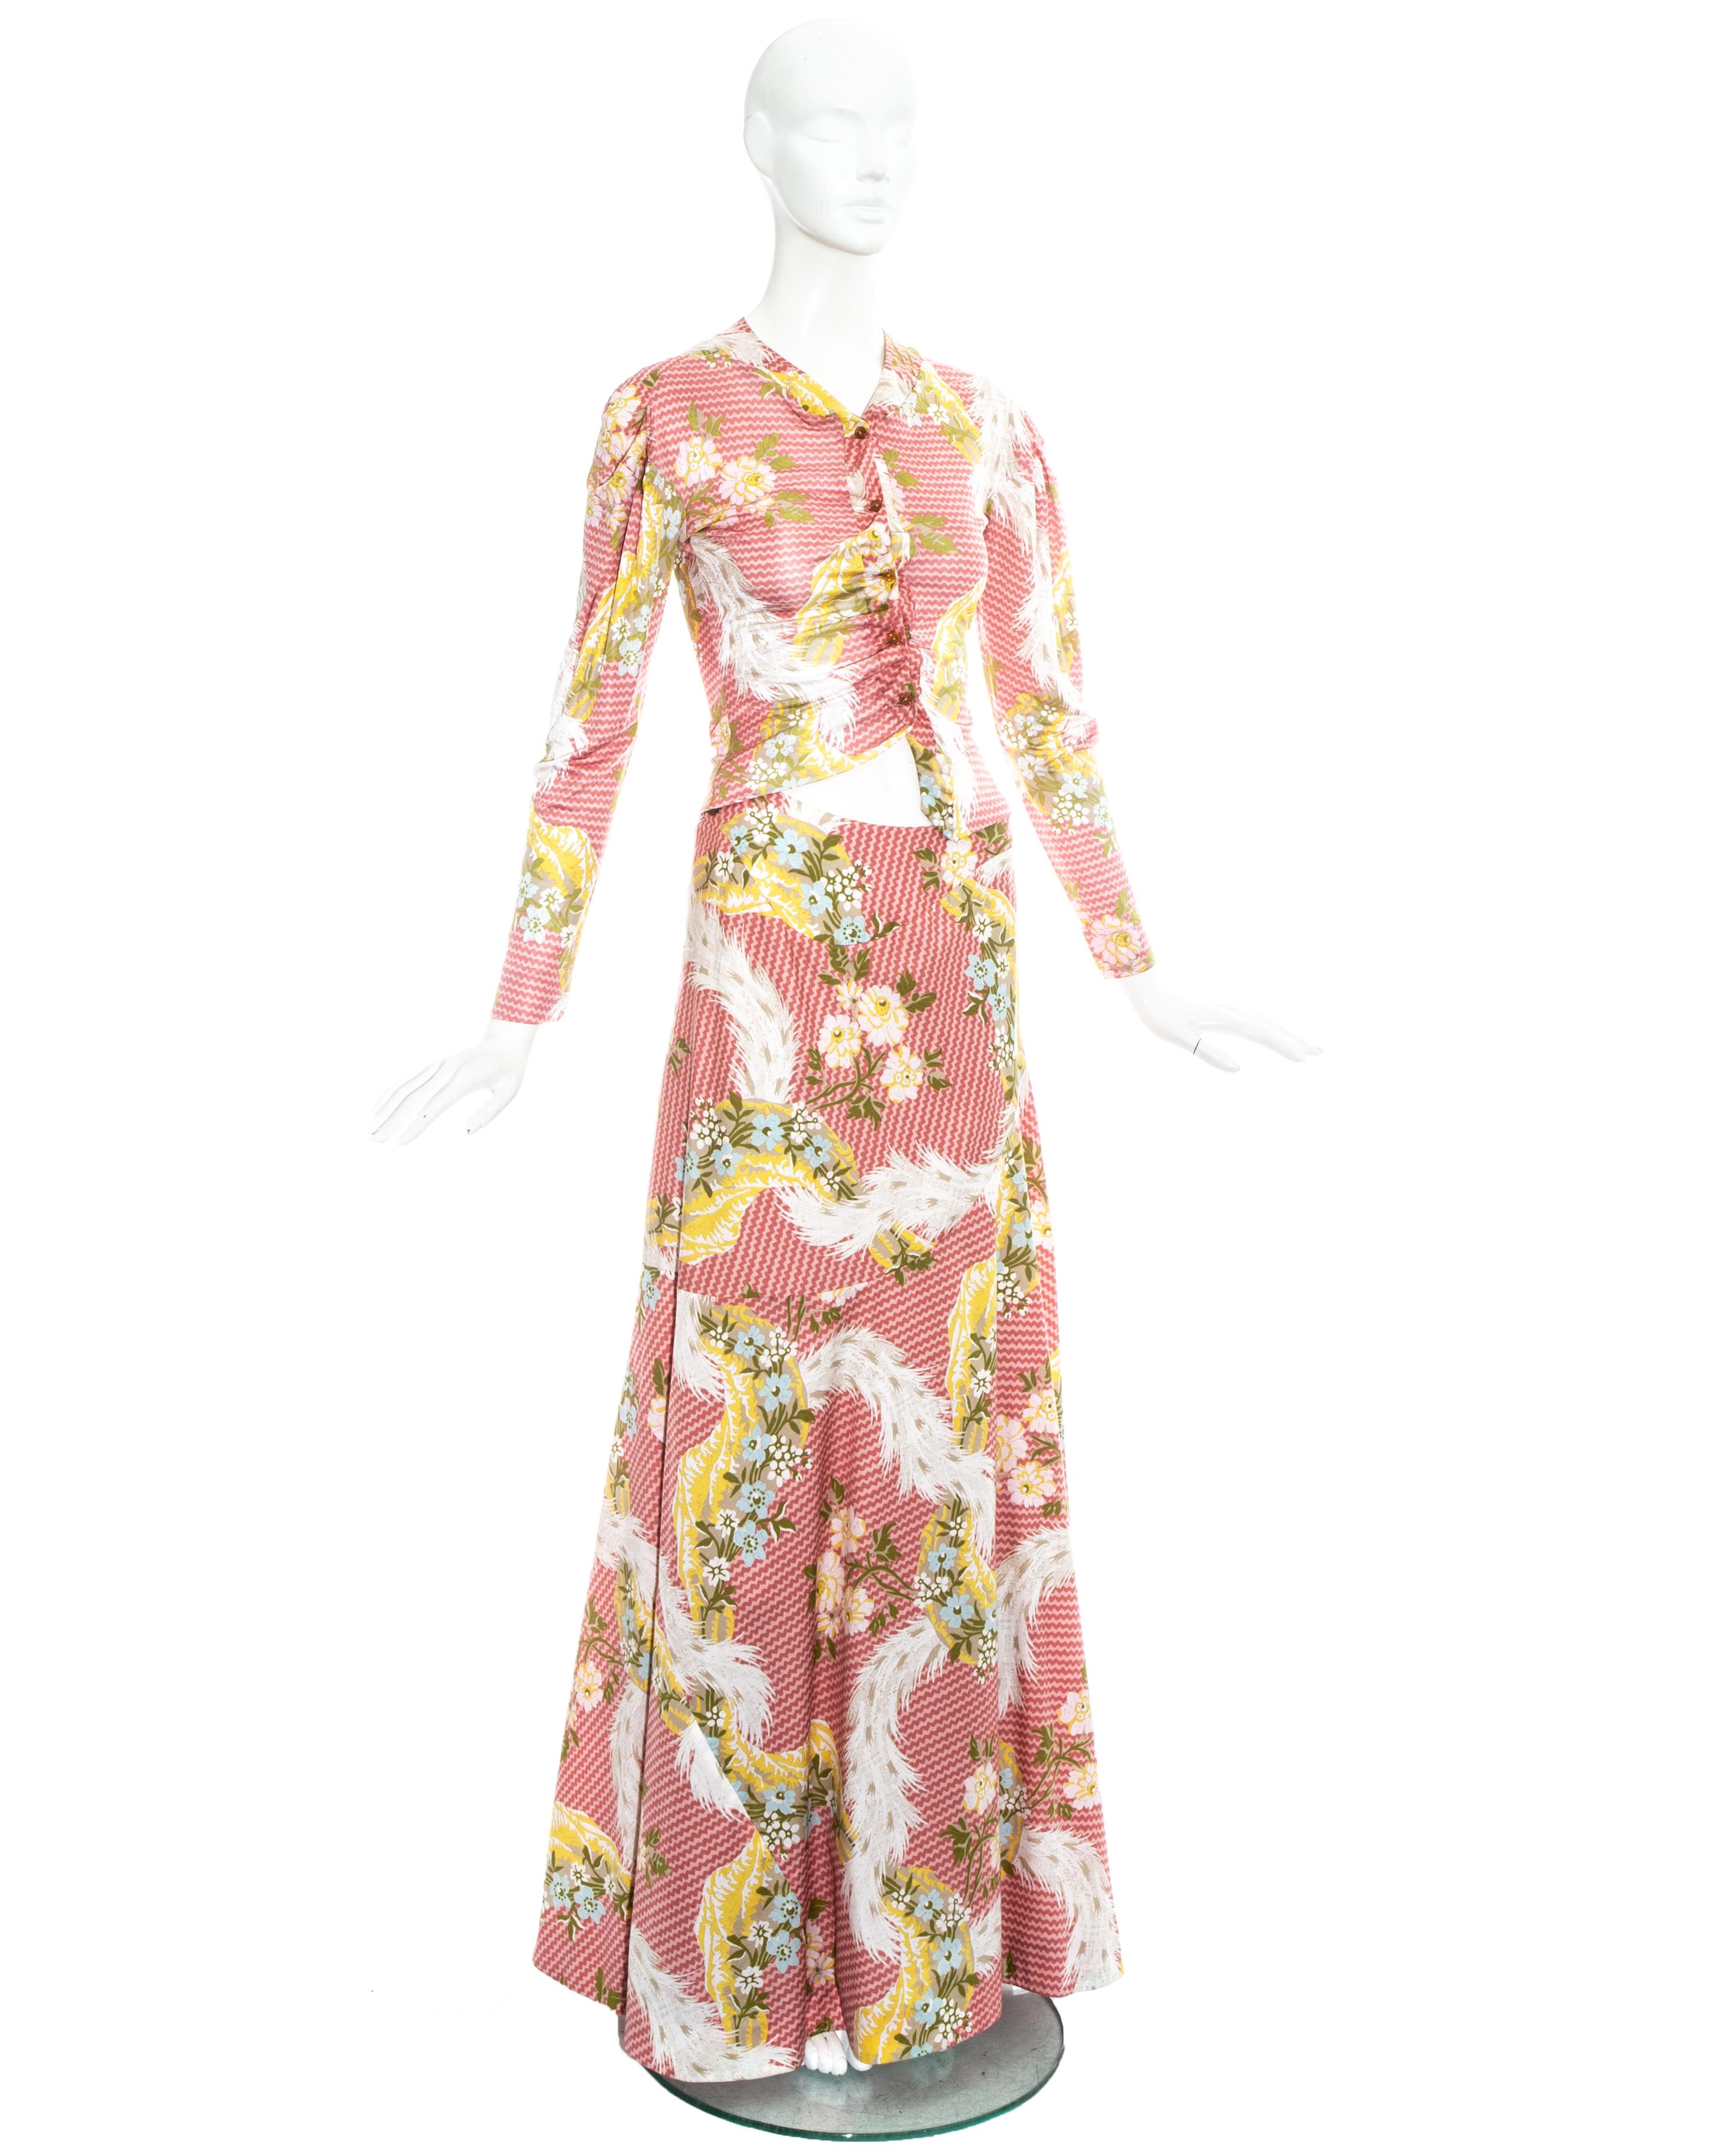 Beige Vivienne Westwood pink floral printed maxi skirt and blouse ensemble, ss 2001 For Sale